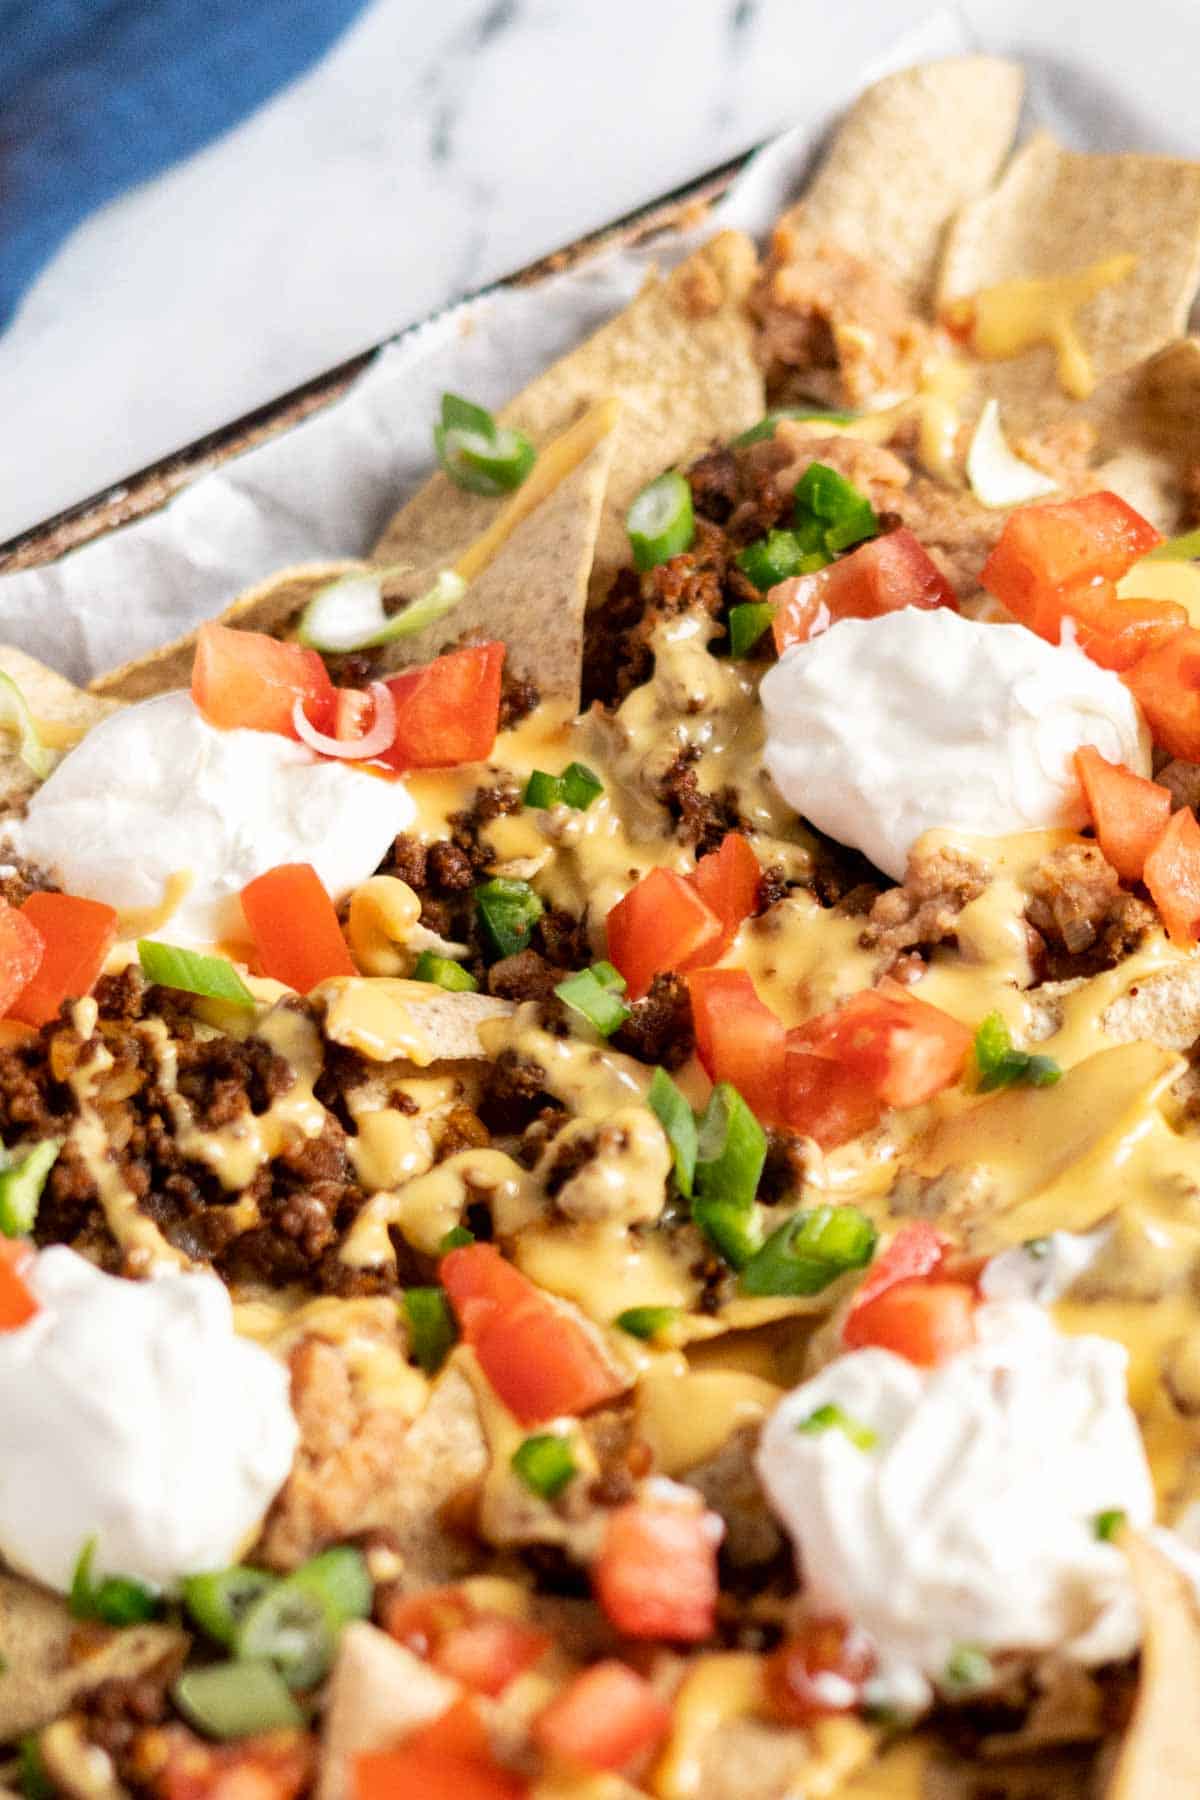 Nachos topped with sour cream, tomatoes, and green onion.